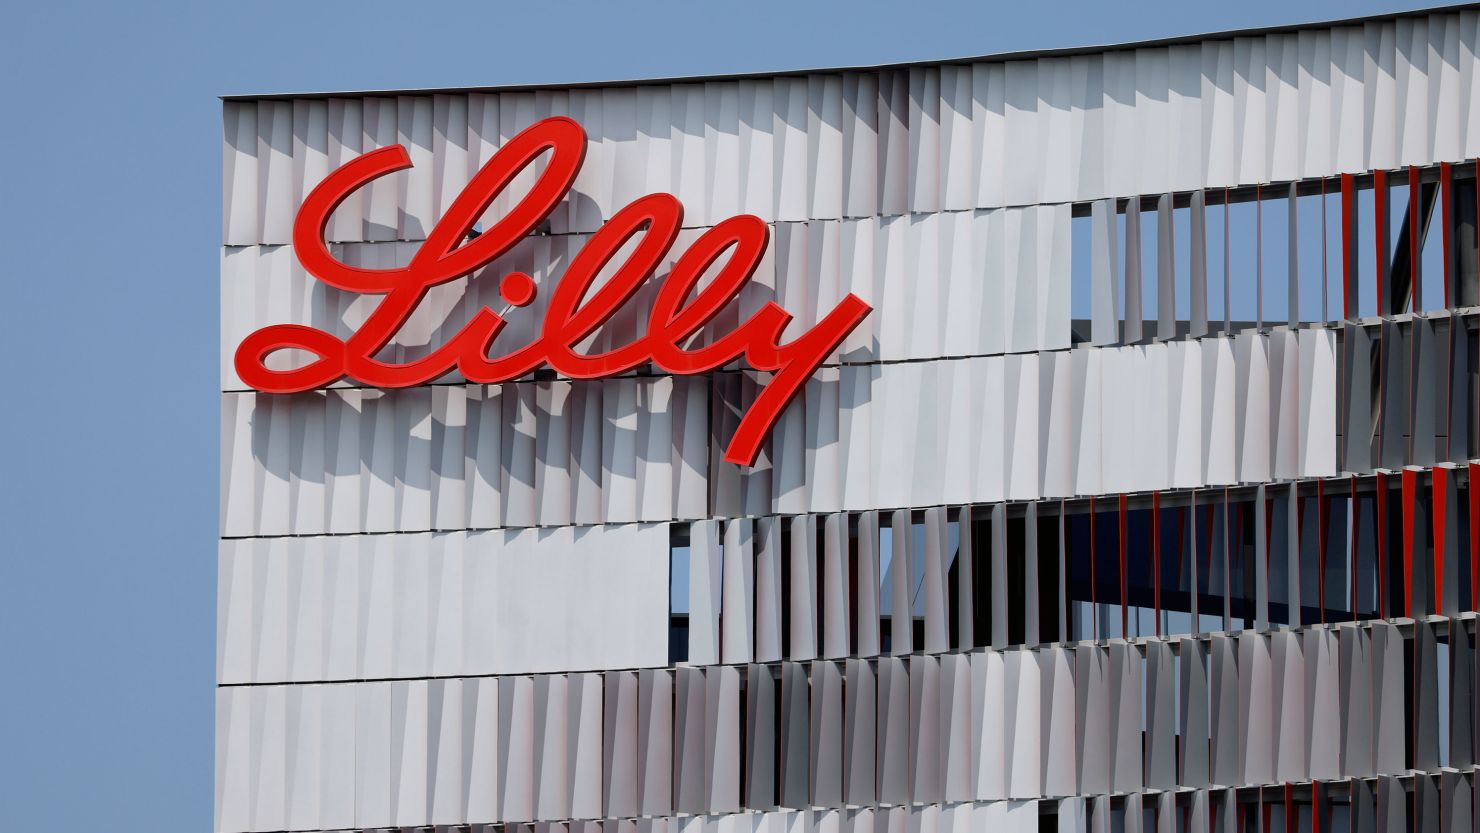 FILE PHOTO: Eli Lilly logo is shown on one of the company's offices in San Diego, California, U.S., September 17, 2020. REUTERS/Mike Blake/File Photo/File Photo